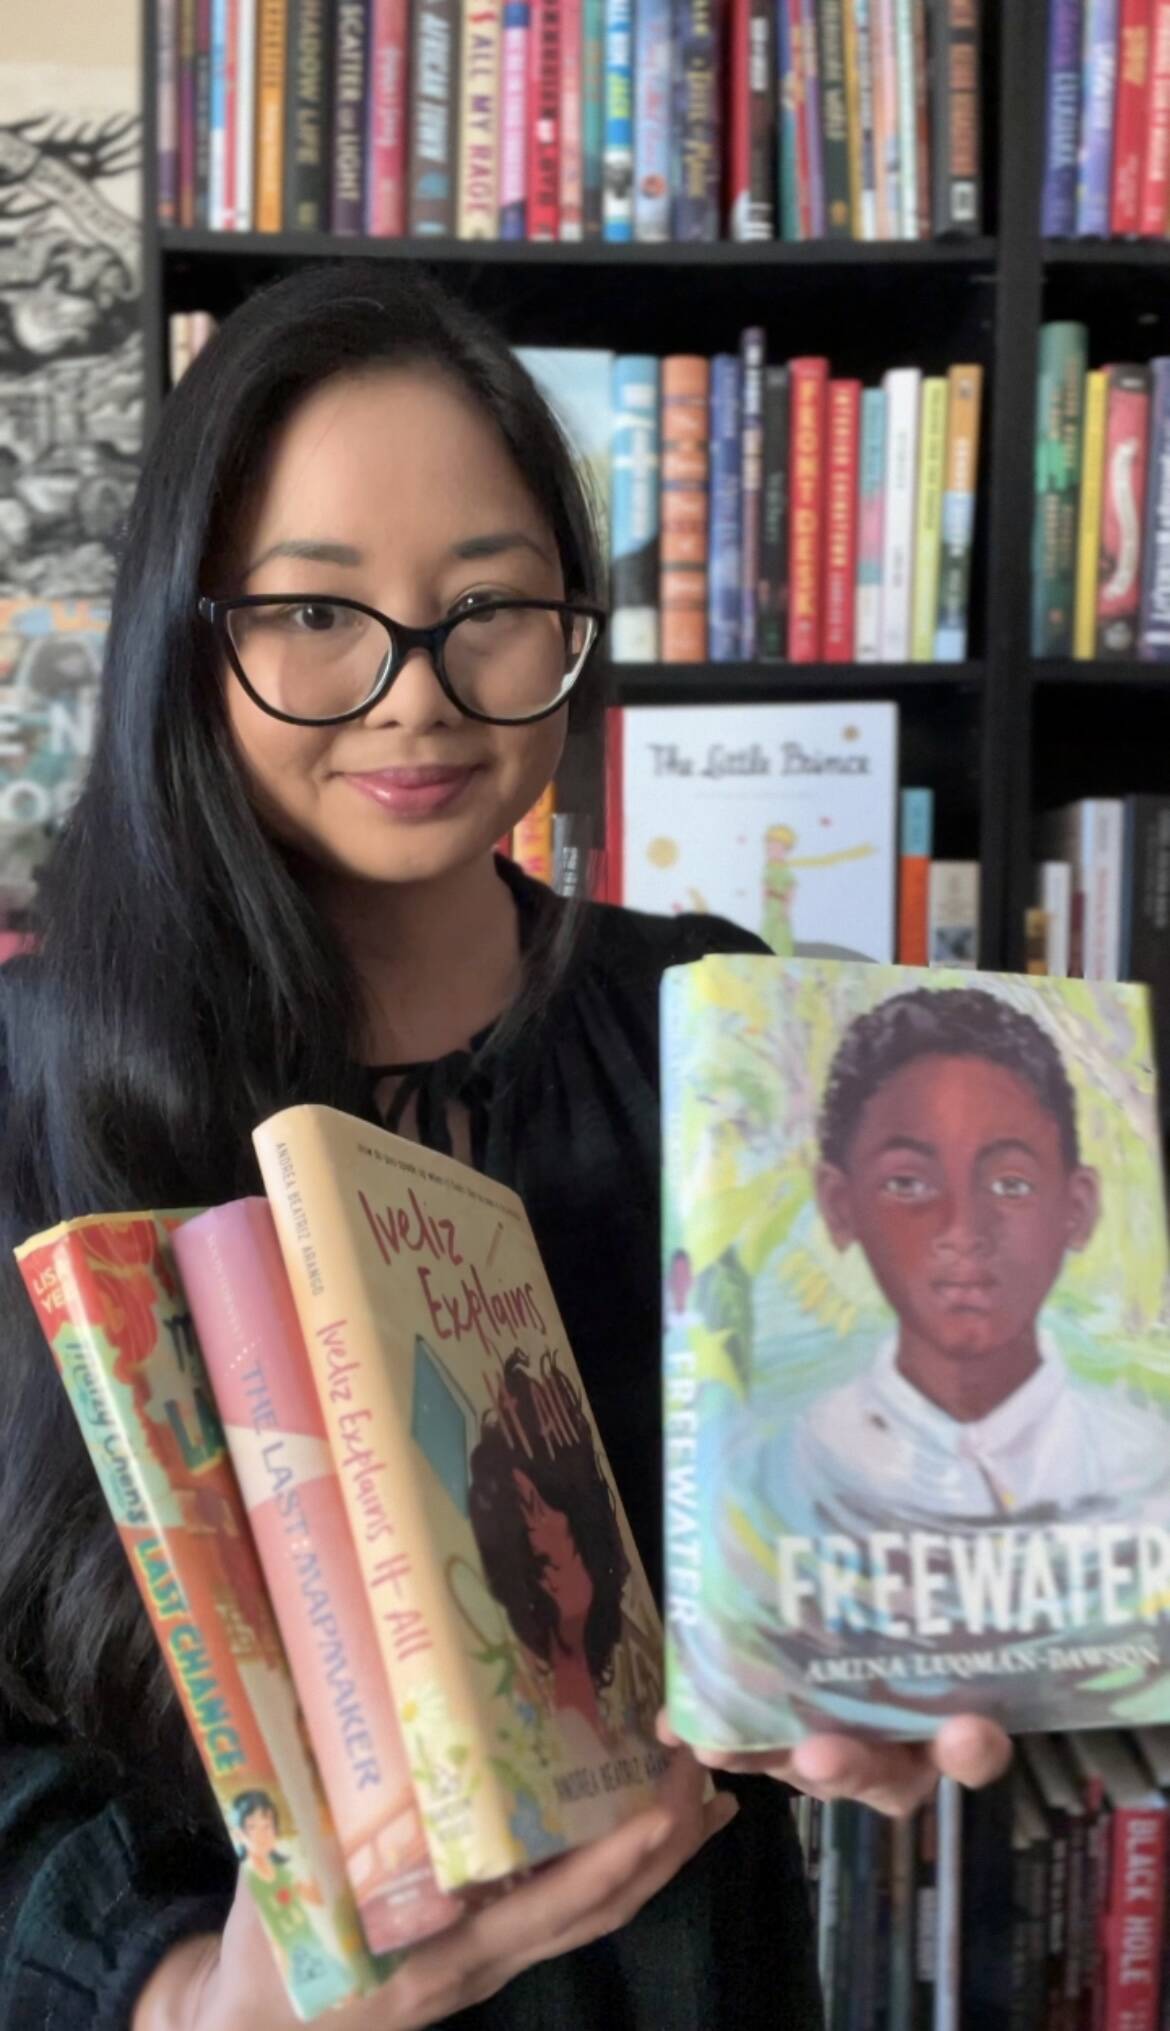 Youth Services Librarian, Kristine Techavanich, was notified that she had been elected to serve on the next Newbery Award Selection Committee.